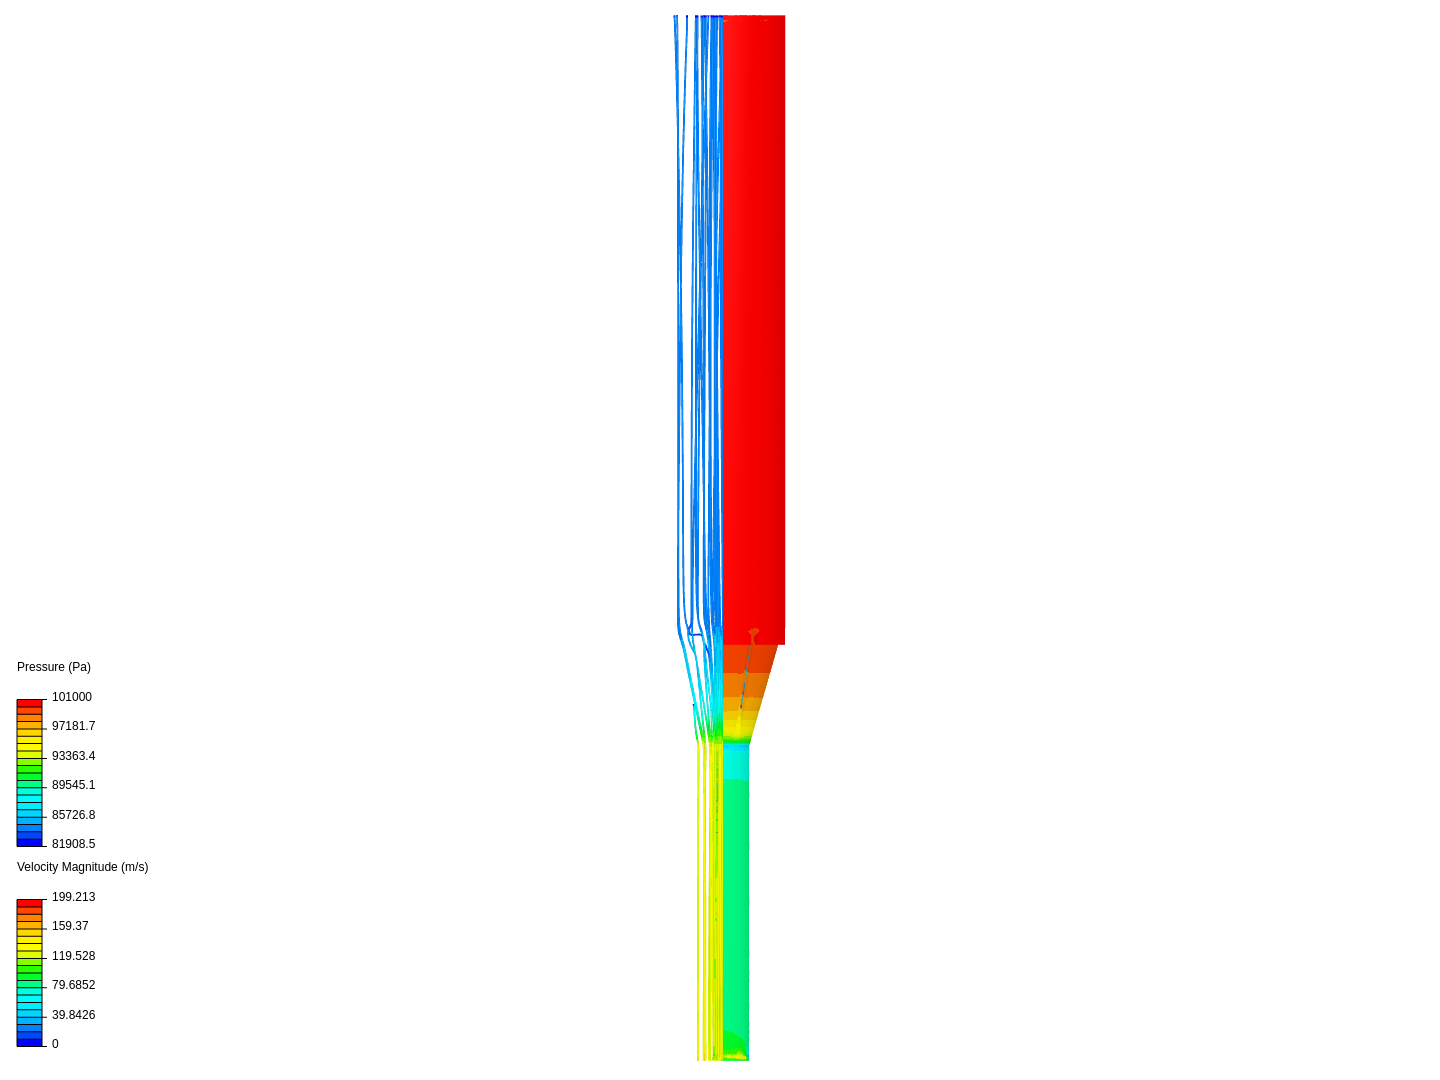 Fins and annulus in an expanding tube image